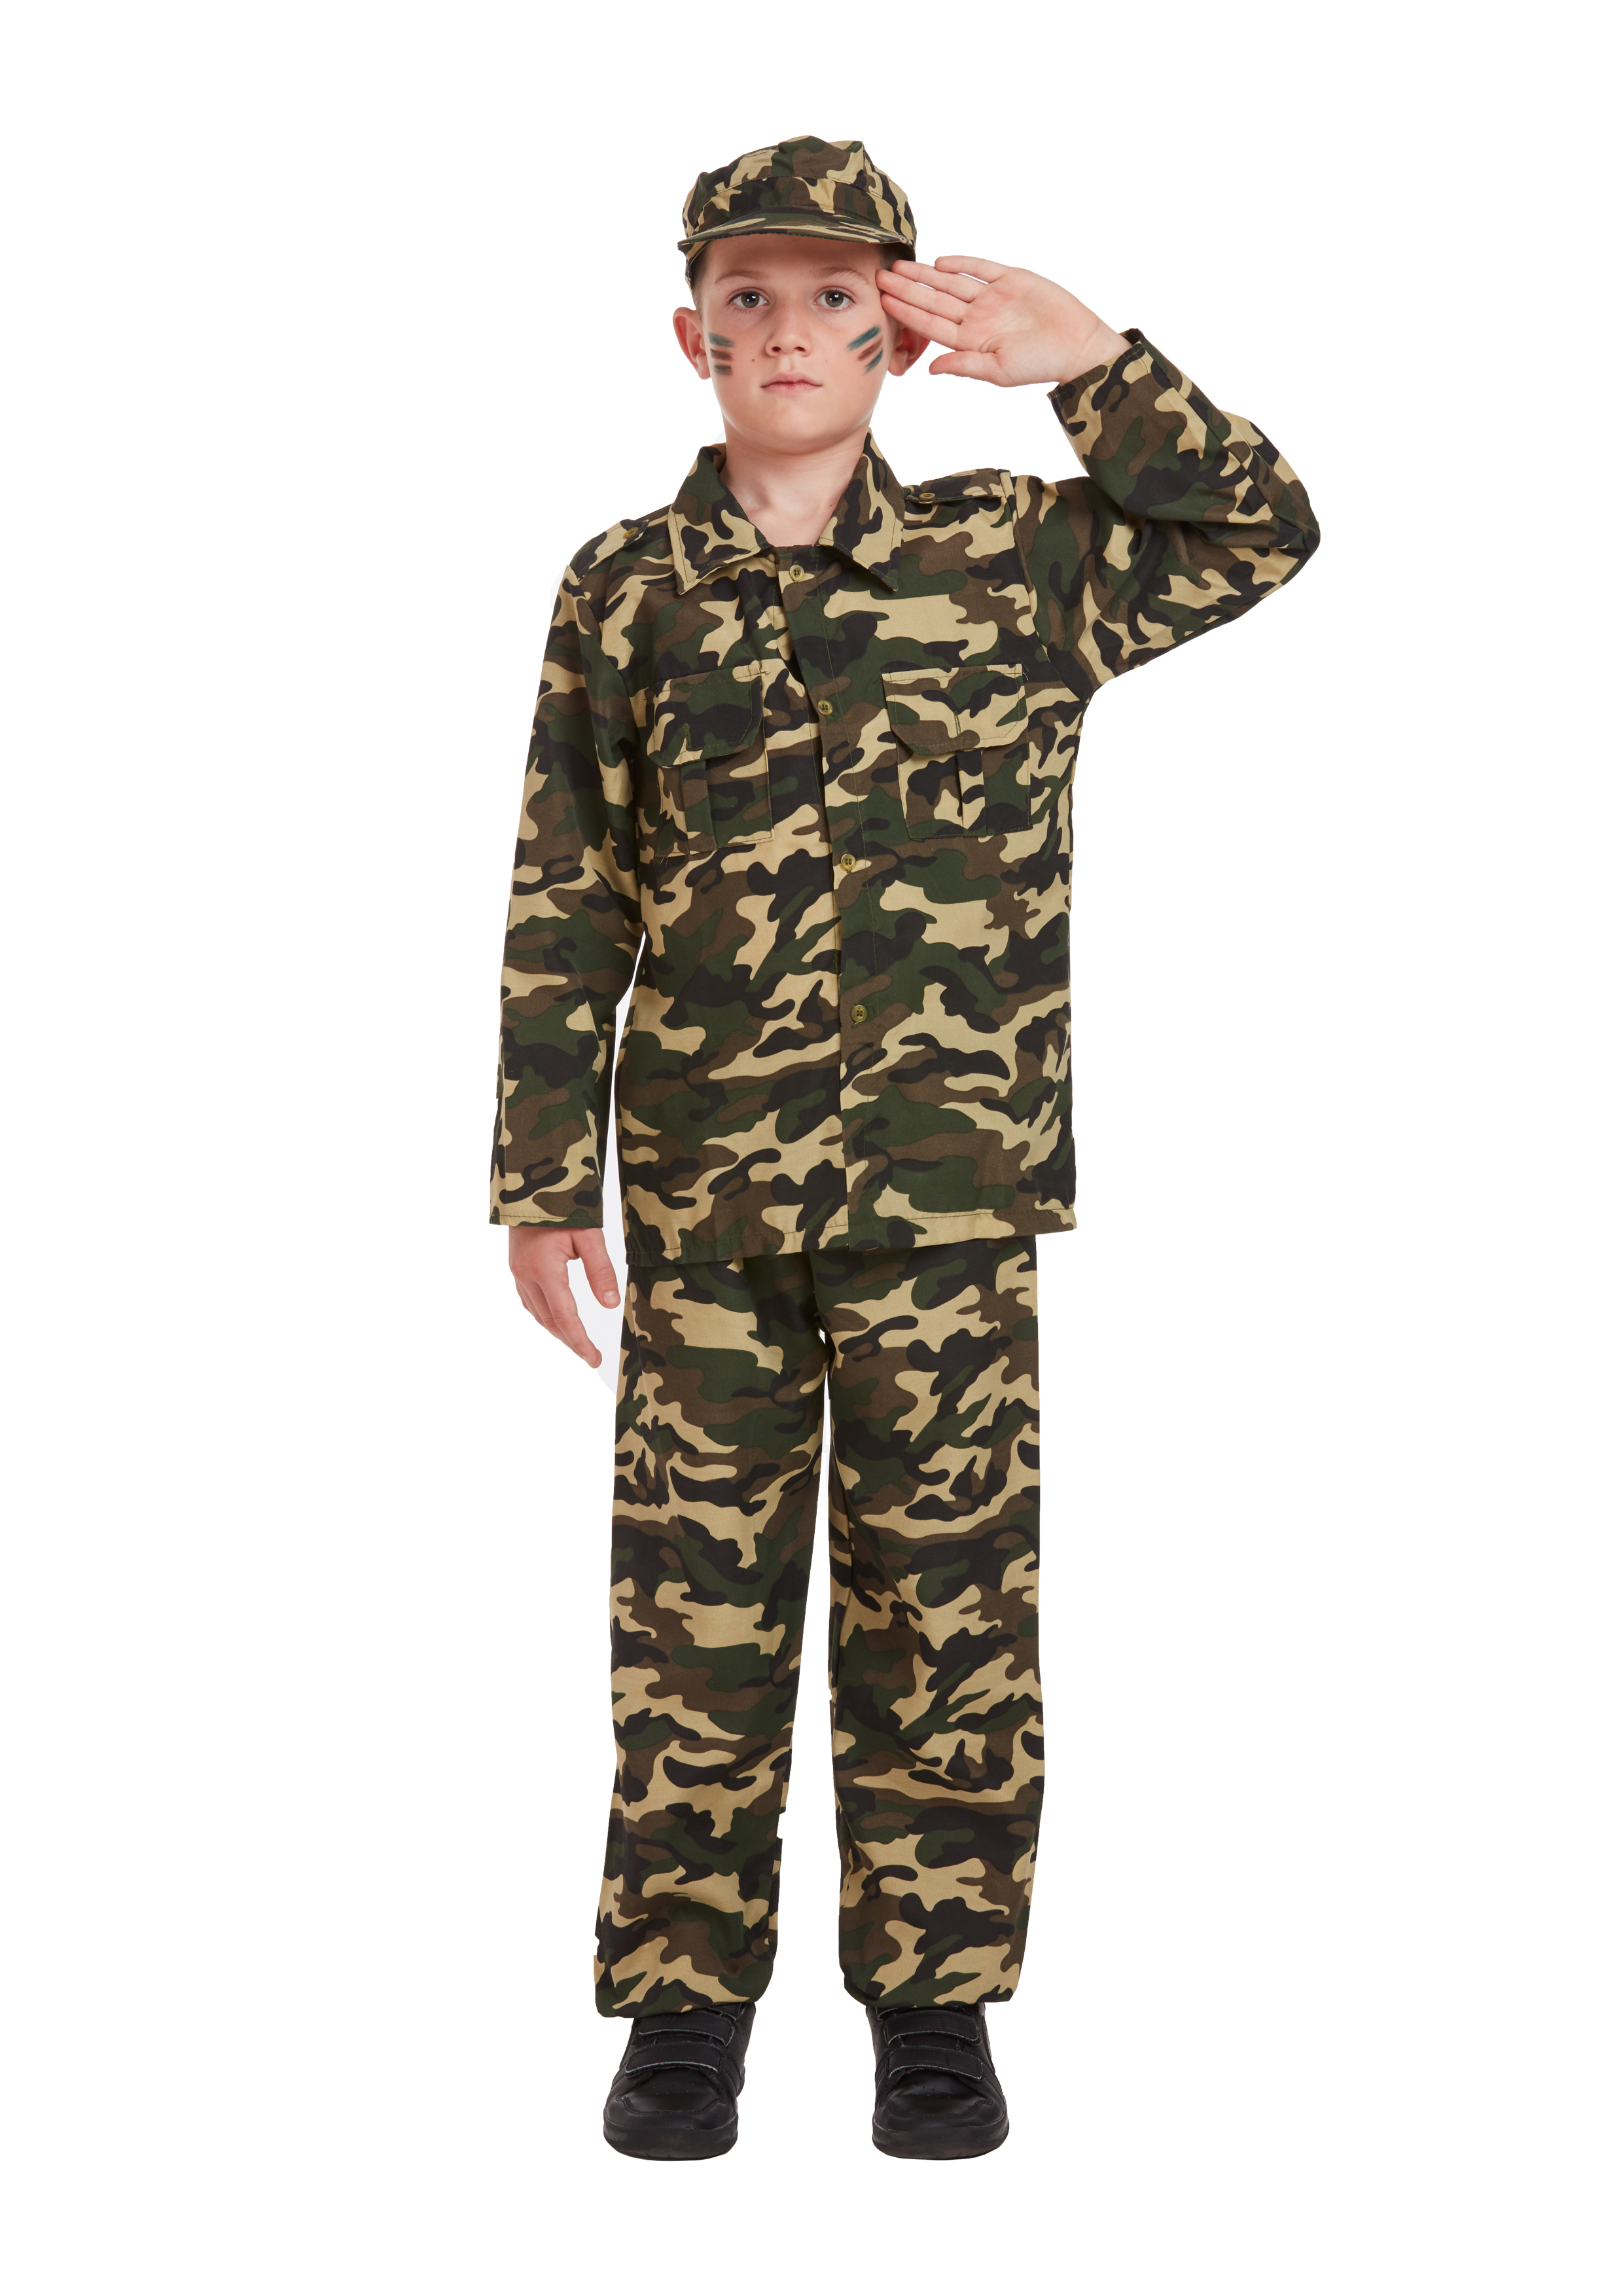 Henbrandt Child Army Military Camouflage Fancy Dress Costume 7-9 Years 